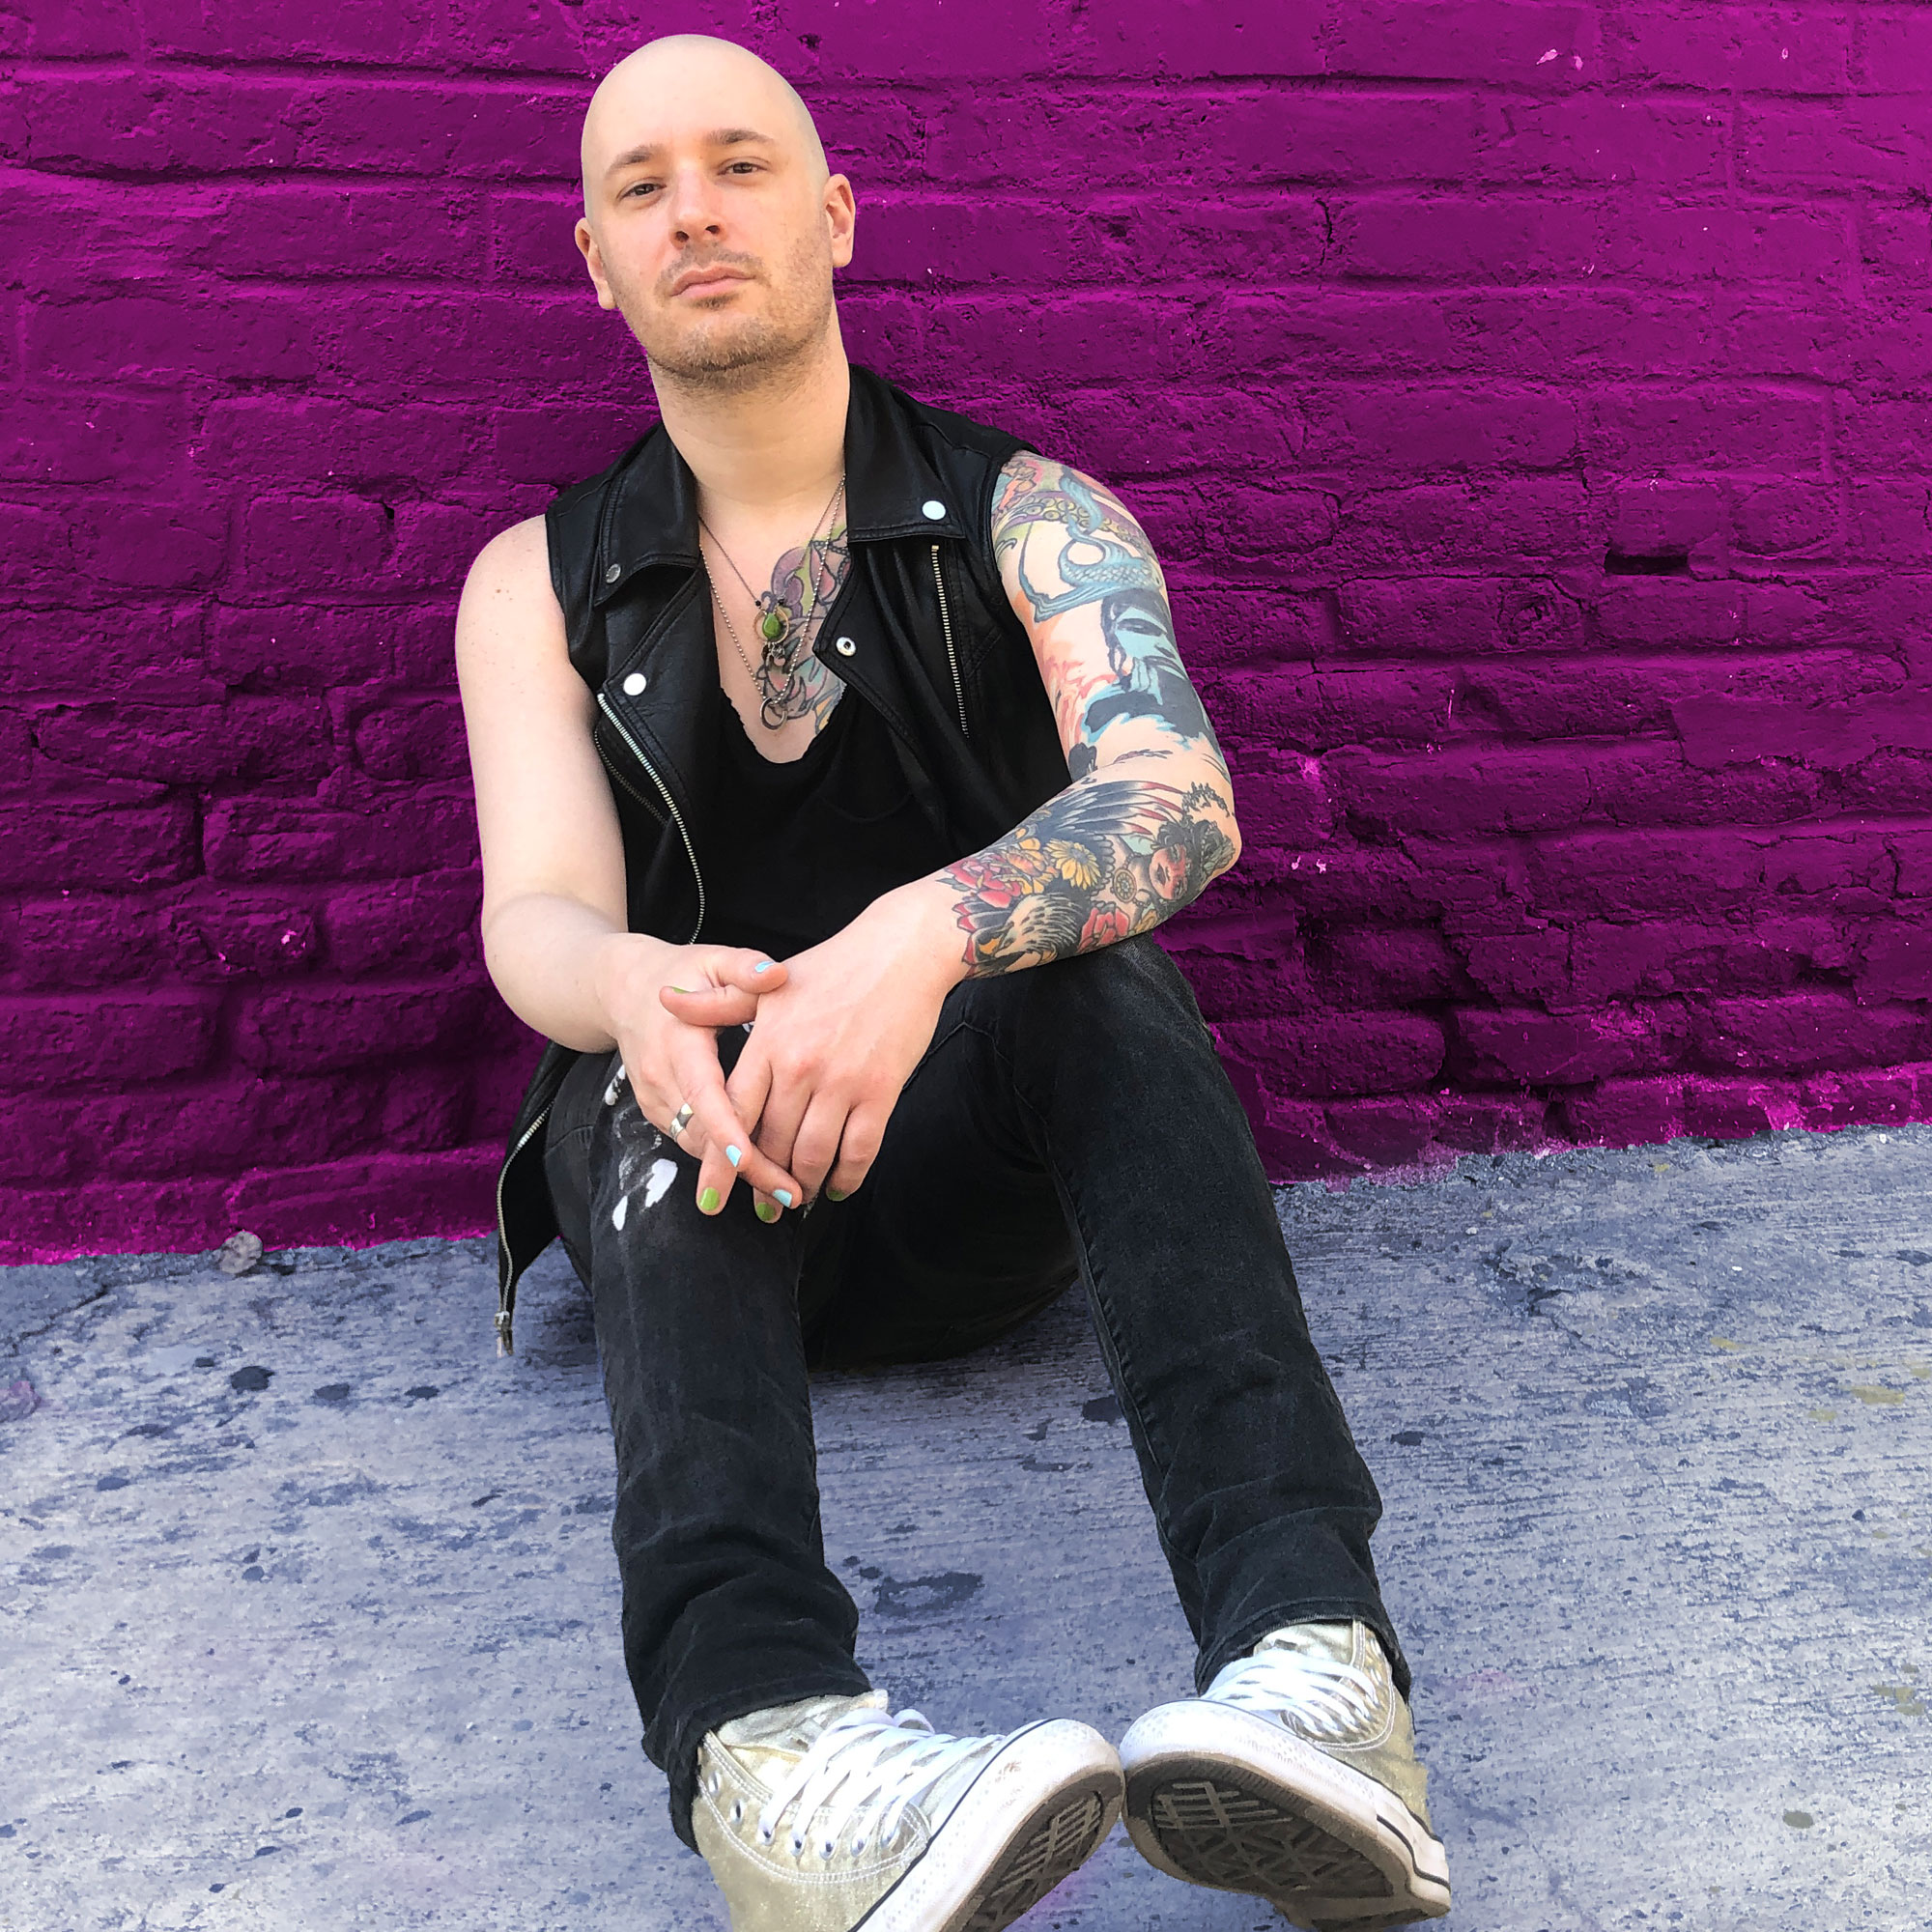 photo of VATTICA, a white nonbinary person with no hair, tattoos, and a leather vest